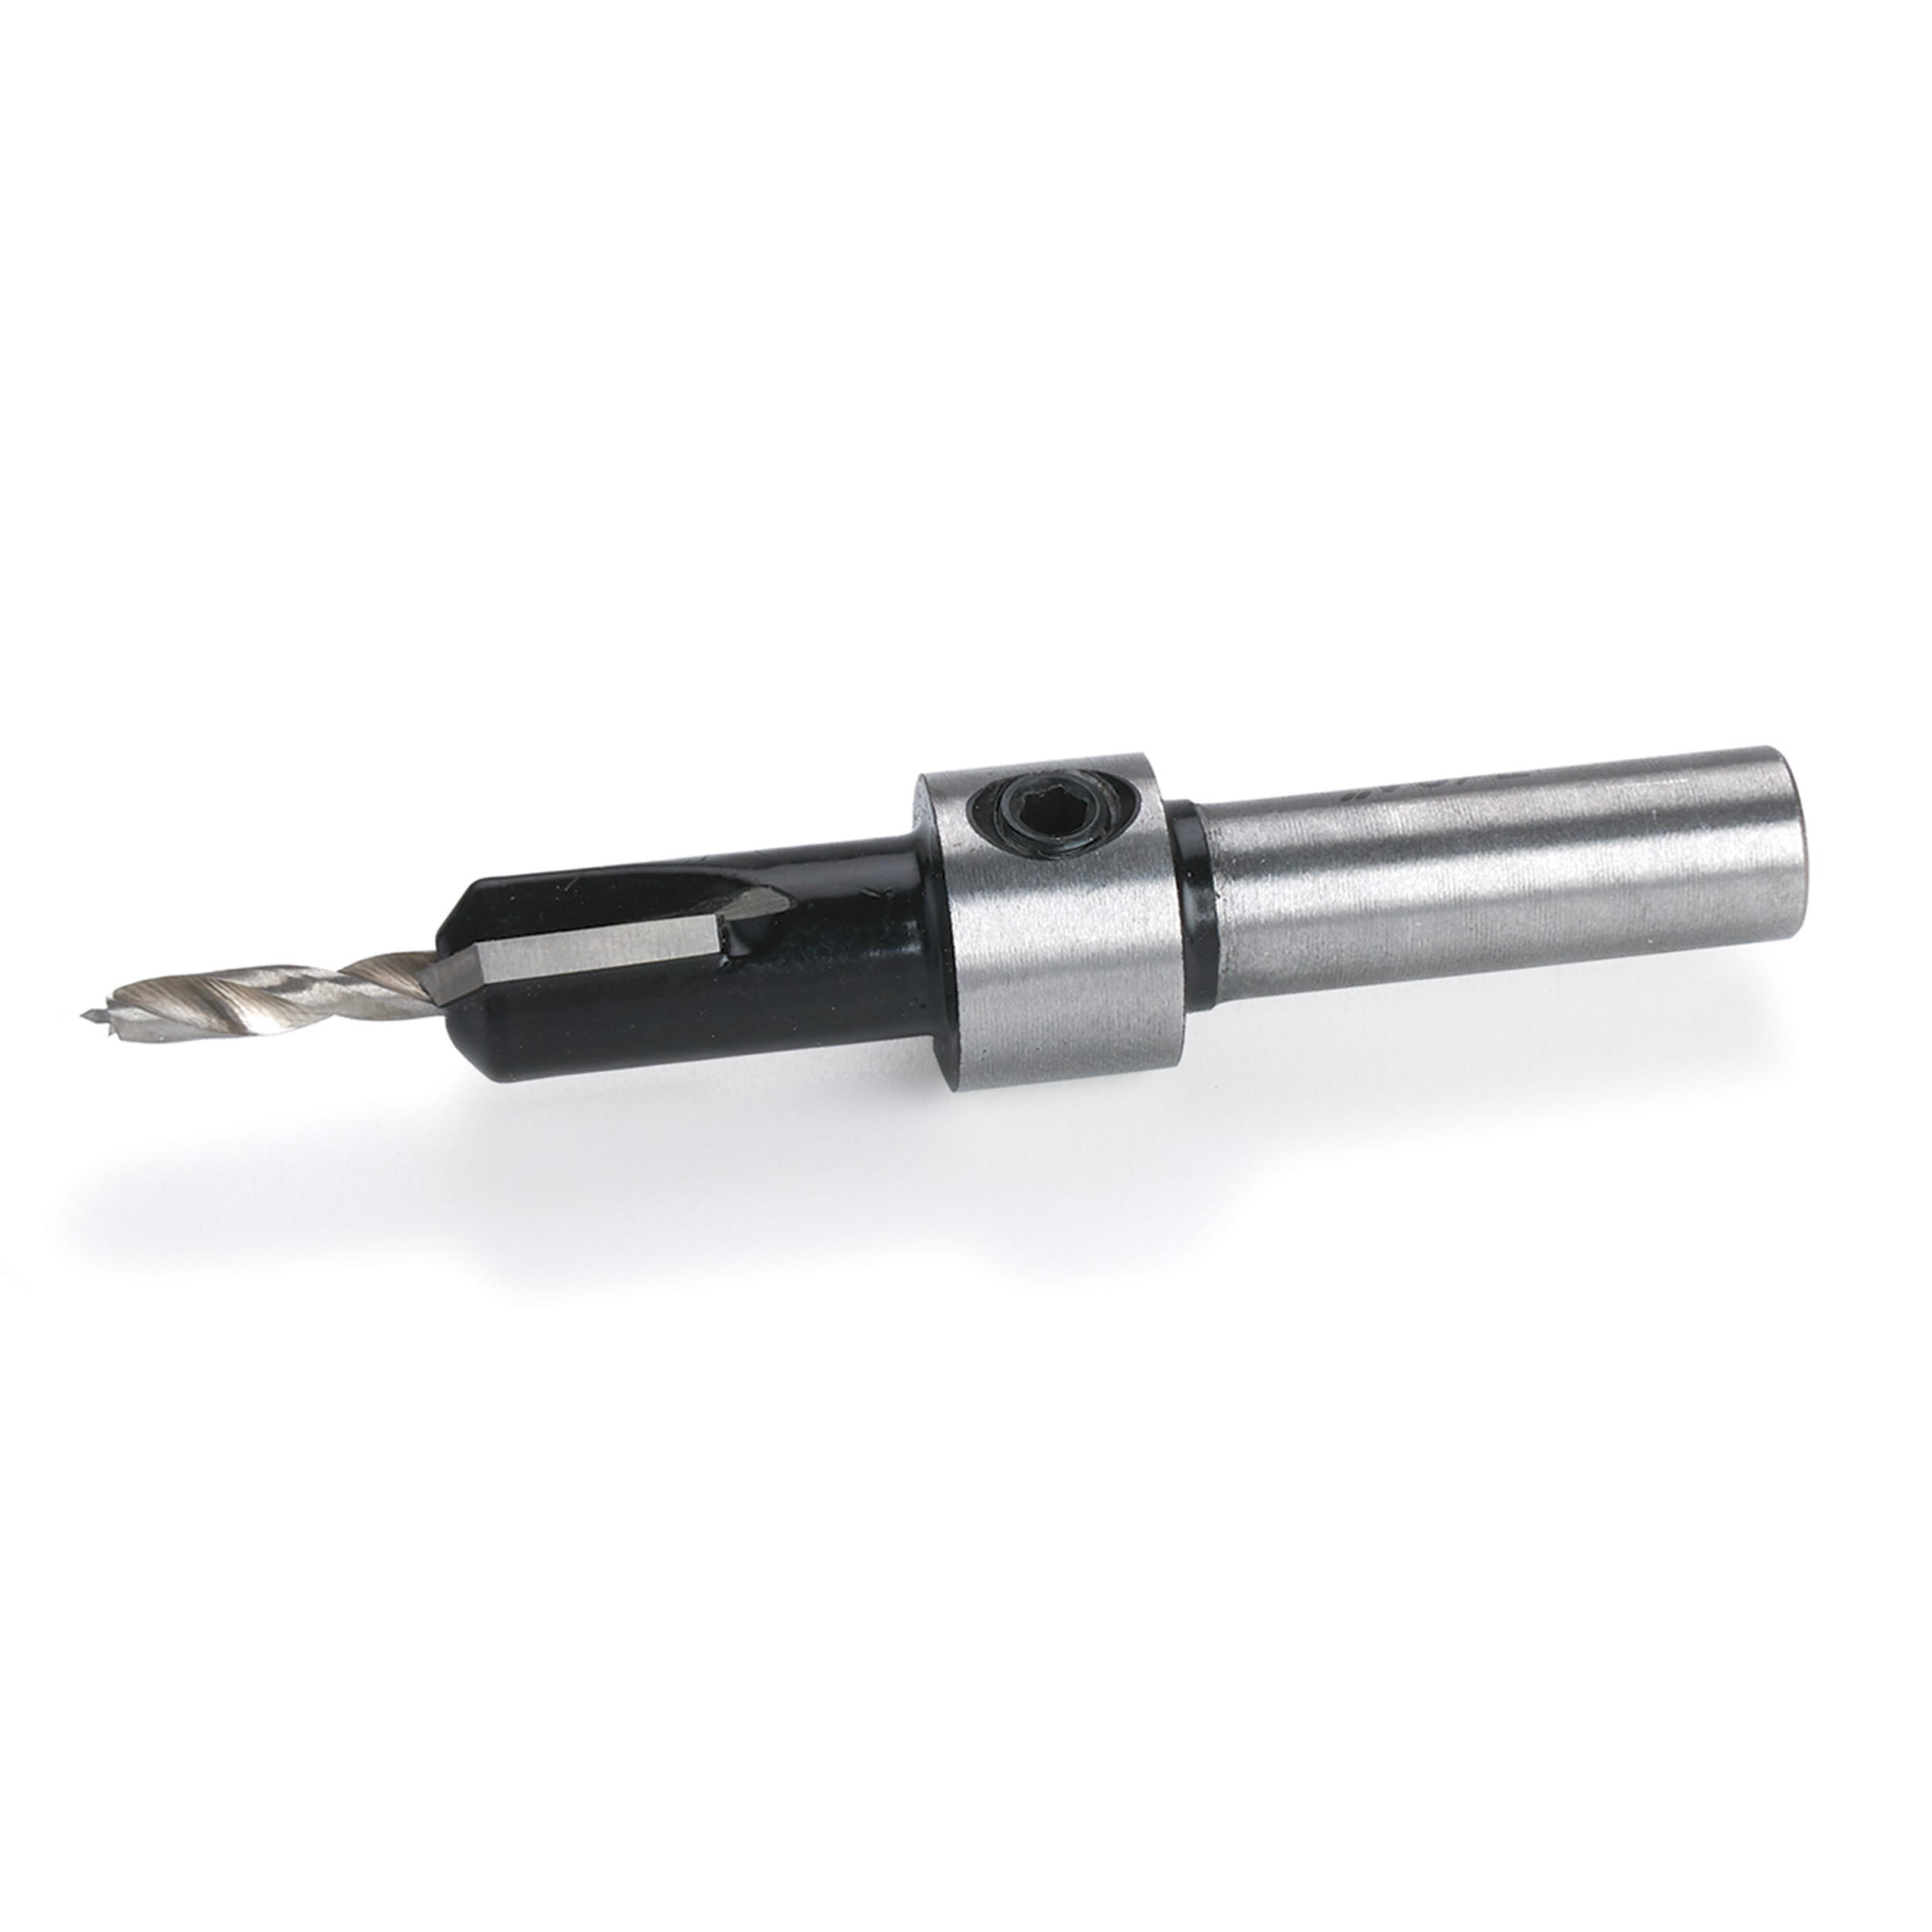 7/64" X 3/8" Carbide-tipped Countersink Set With Brad Point Pilot